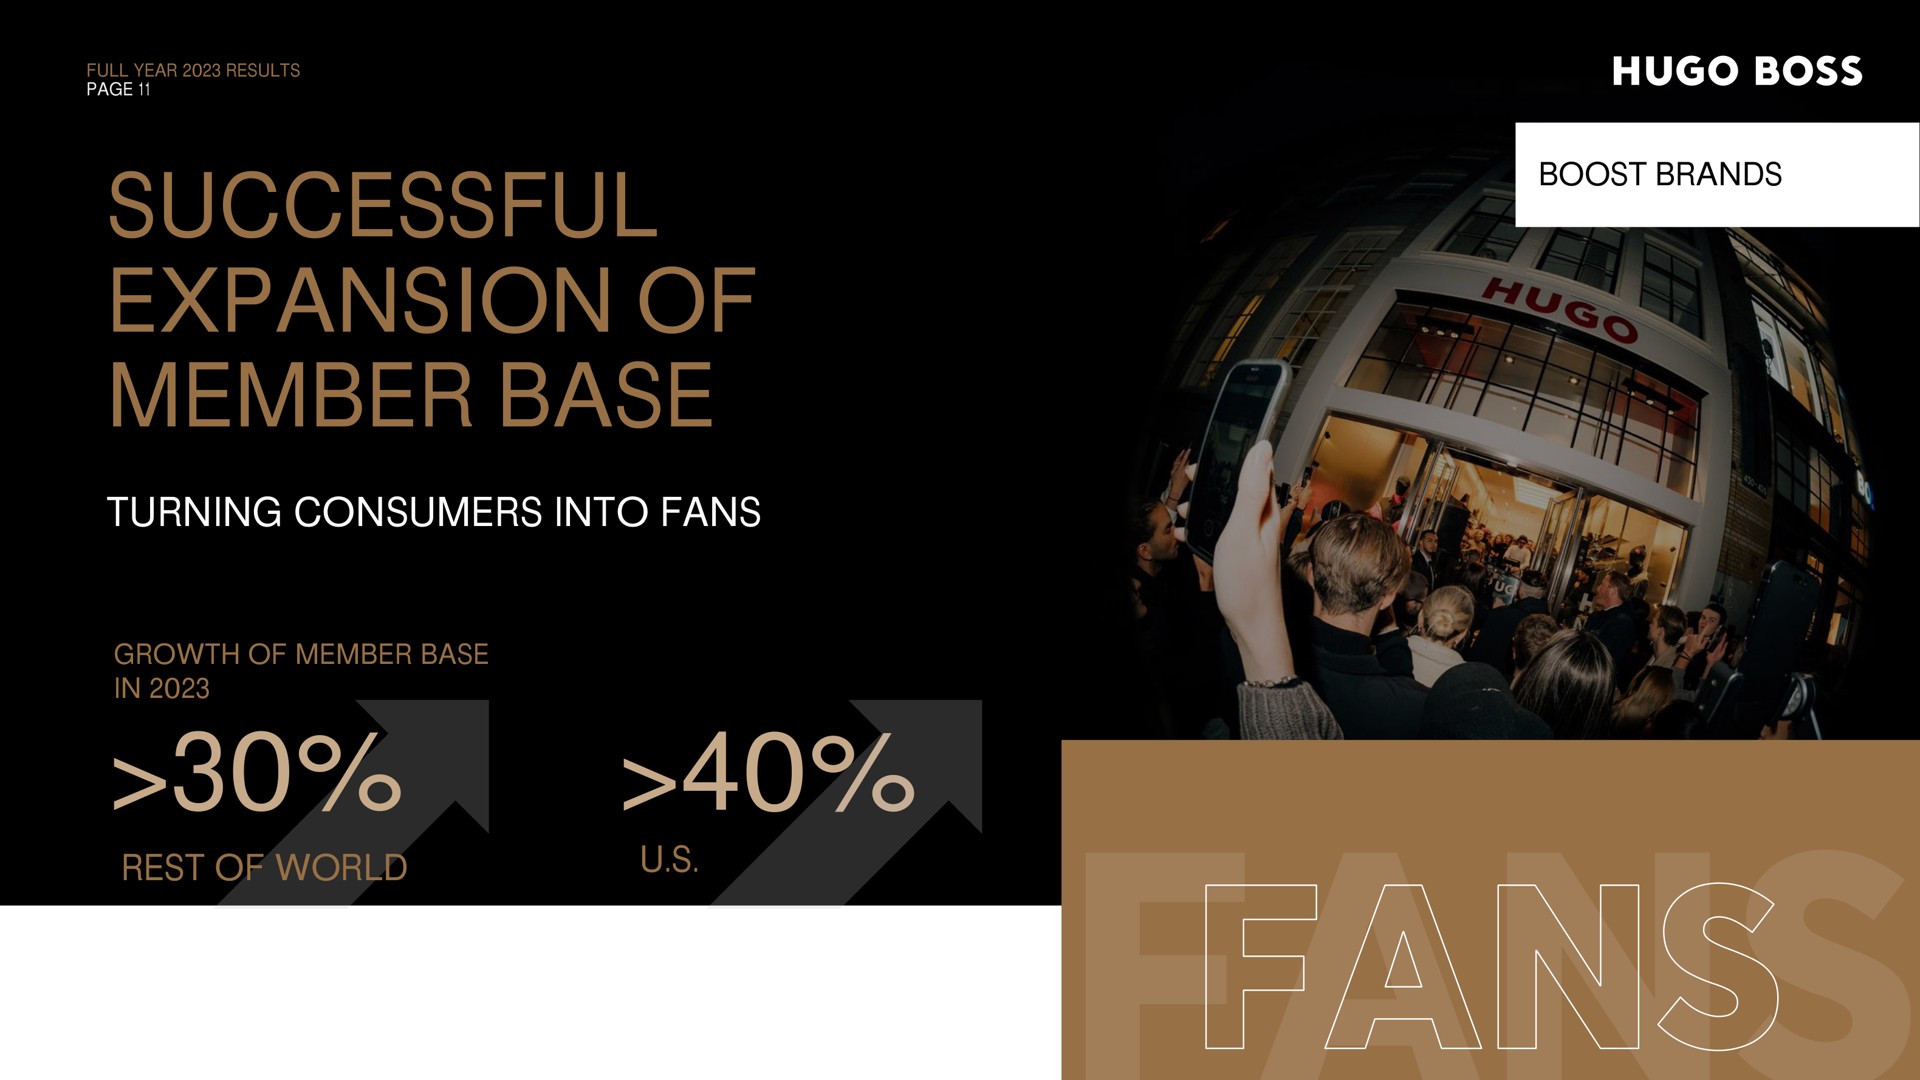 successful expansion of member base turning consumers into fans rest of world boost brands fans wha | Hugo Boss